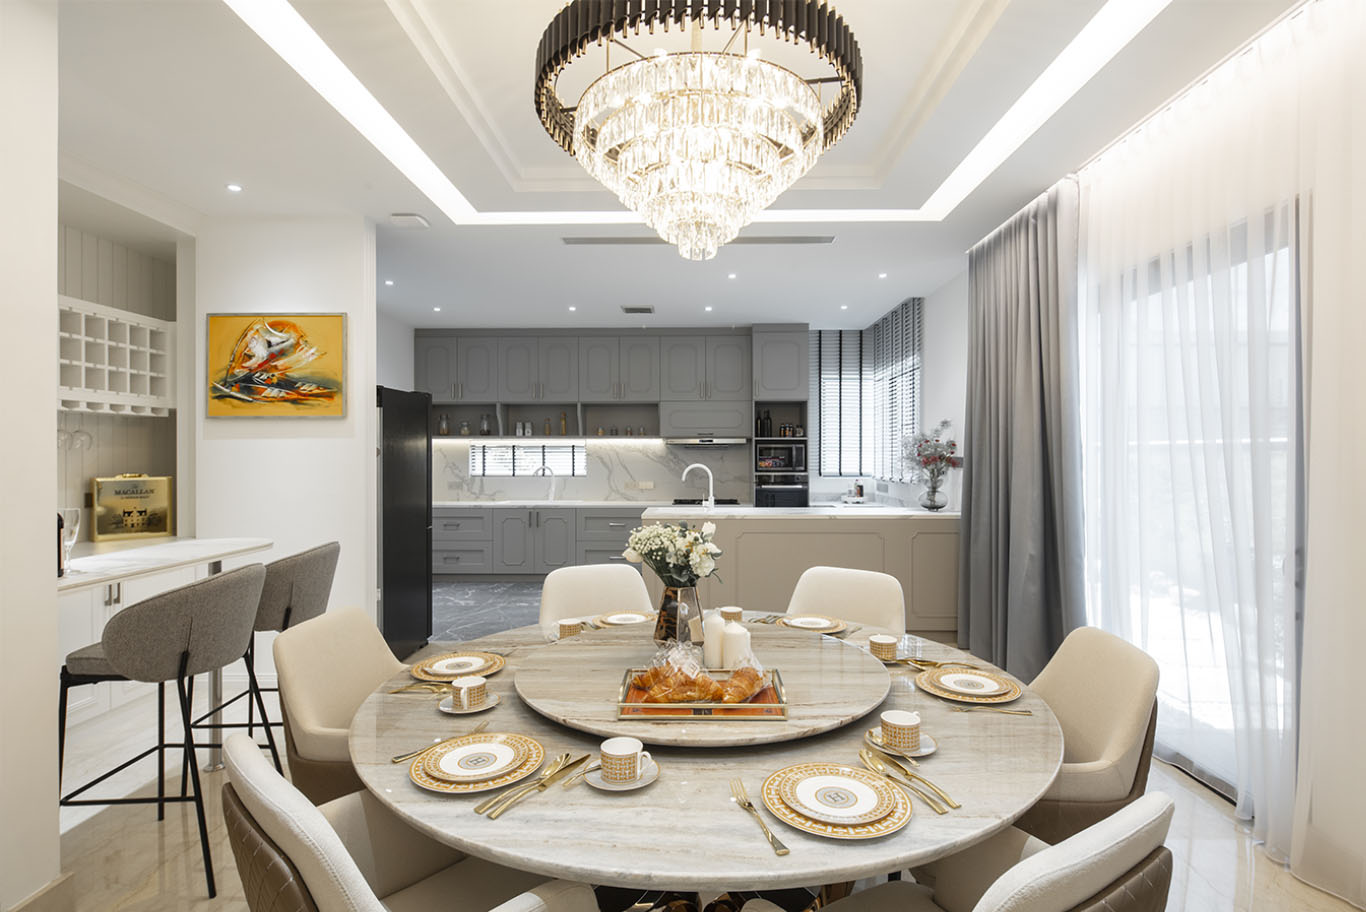 MIEUX The White Royale chandelier for dining area Mieux interior design